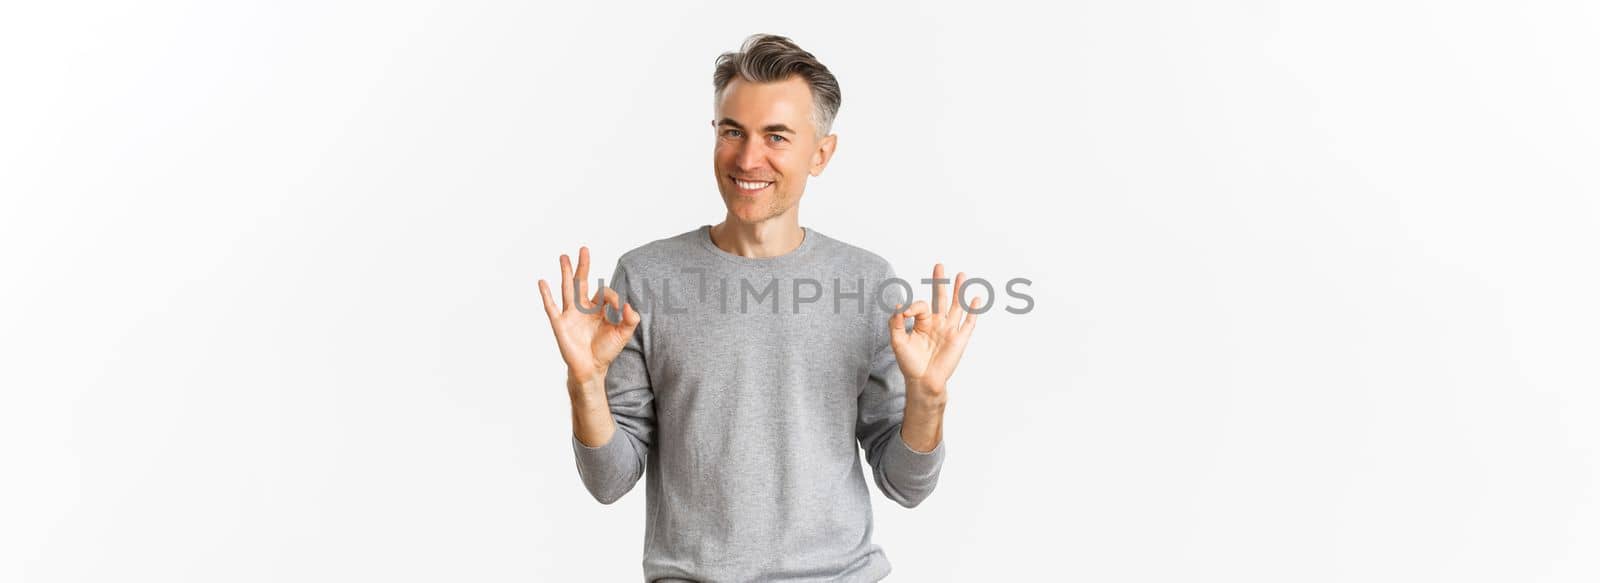 Portrait of handsome middle-aged man, smiling and looking confident while showing okay signs, guarantee something is good, standing over white background.